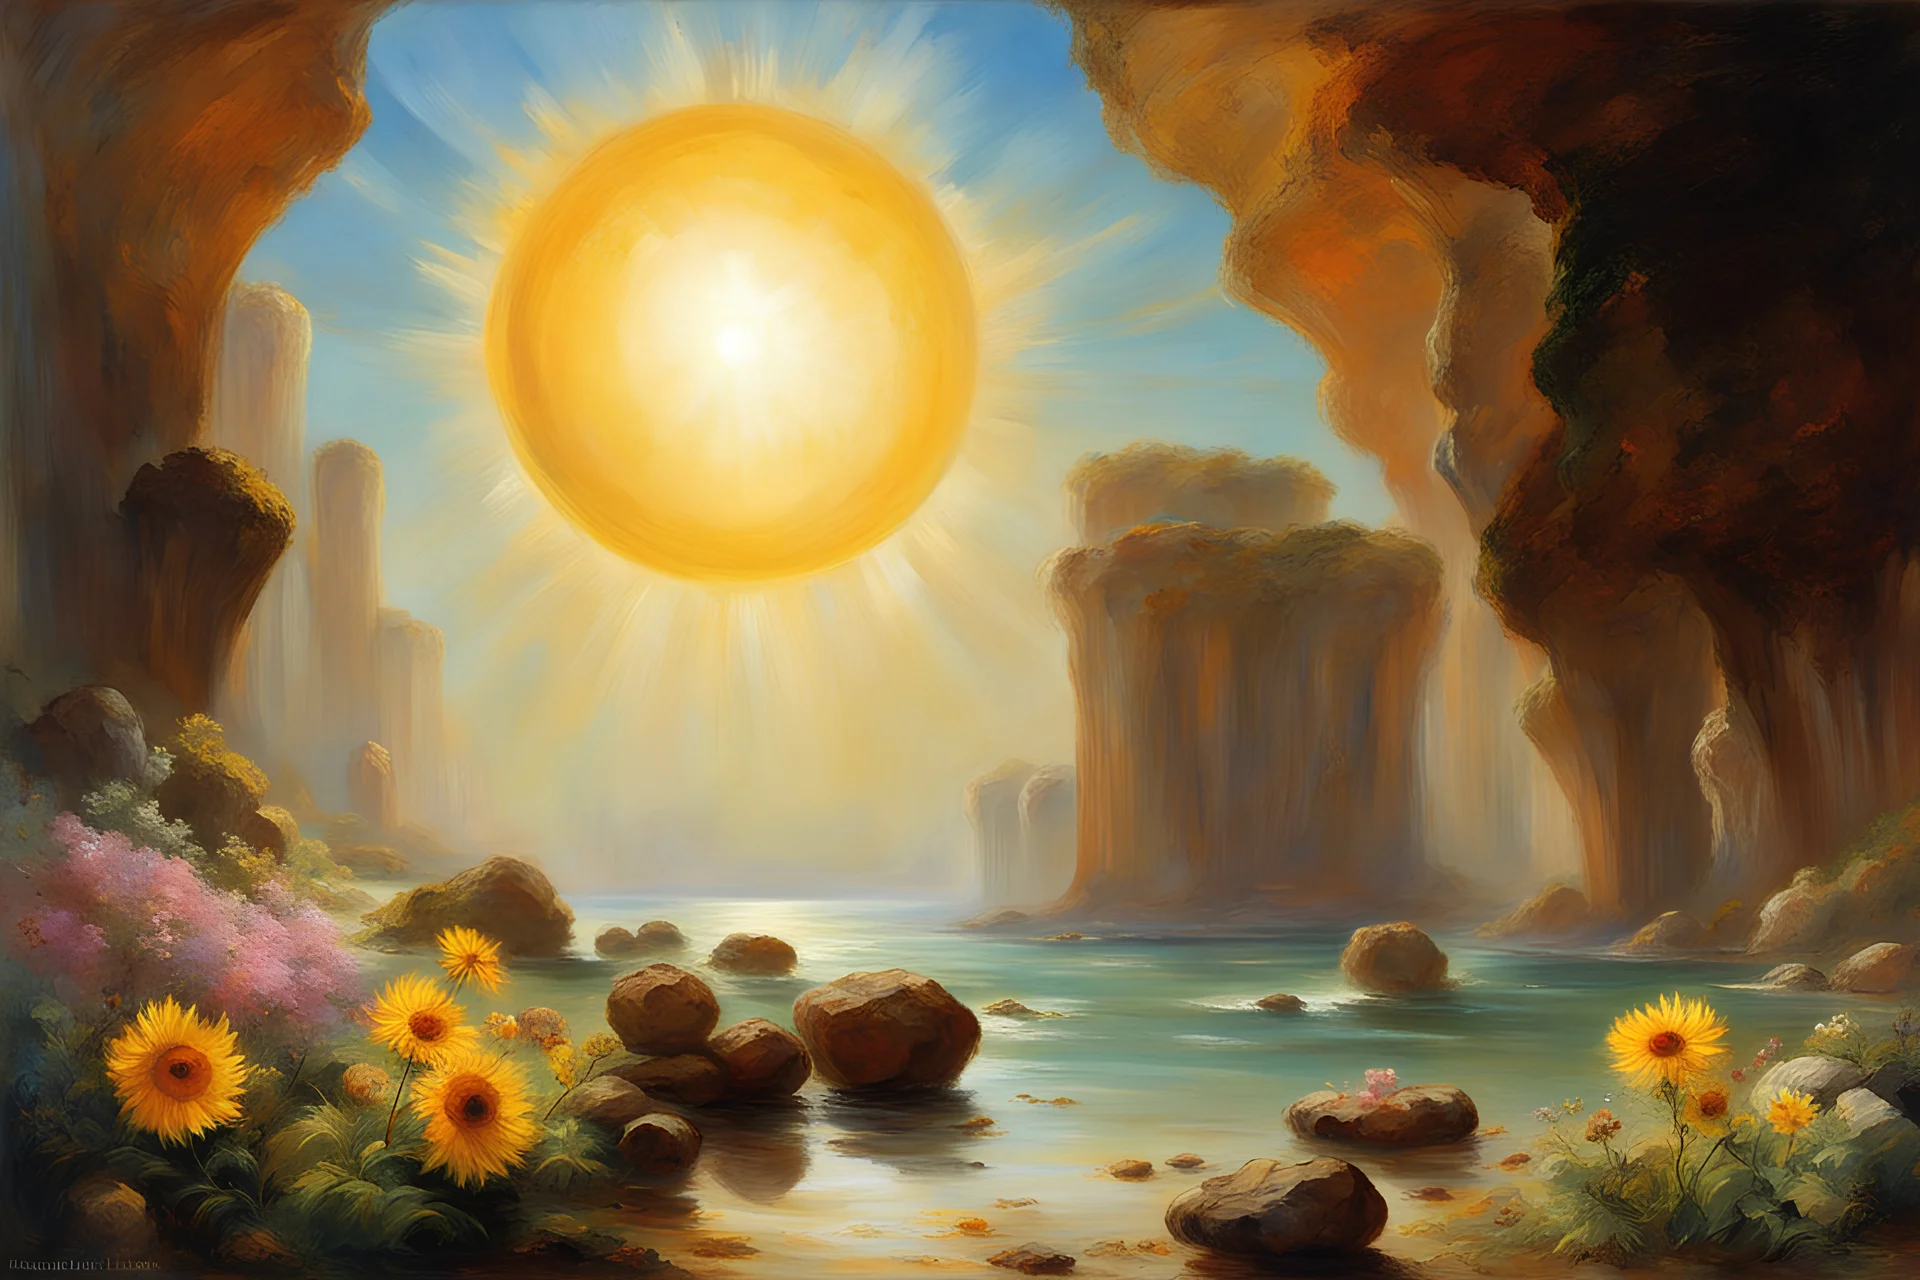 sunny day, planet in the sky, rocks, flowers, cliffs, sci-fi, friedrich eckenfelder and william turner impressionism paintings